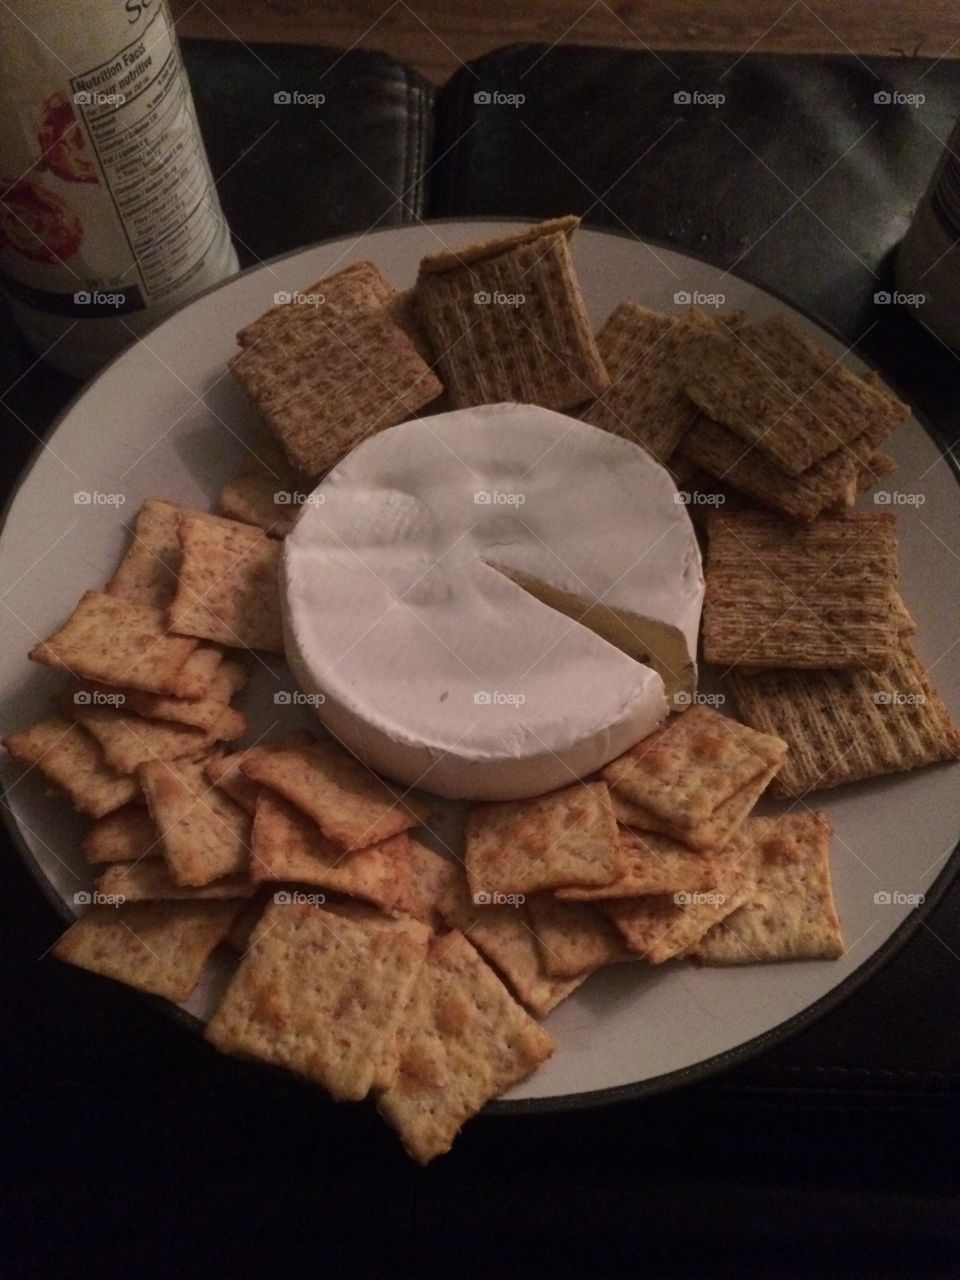 Cheese & crackers. A wonderful snack